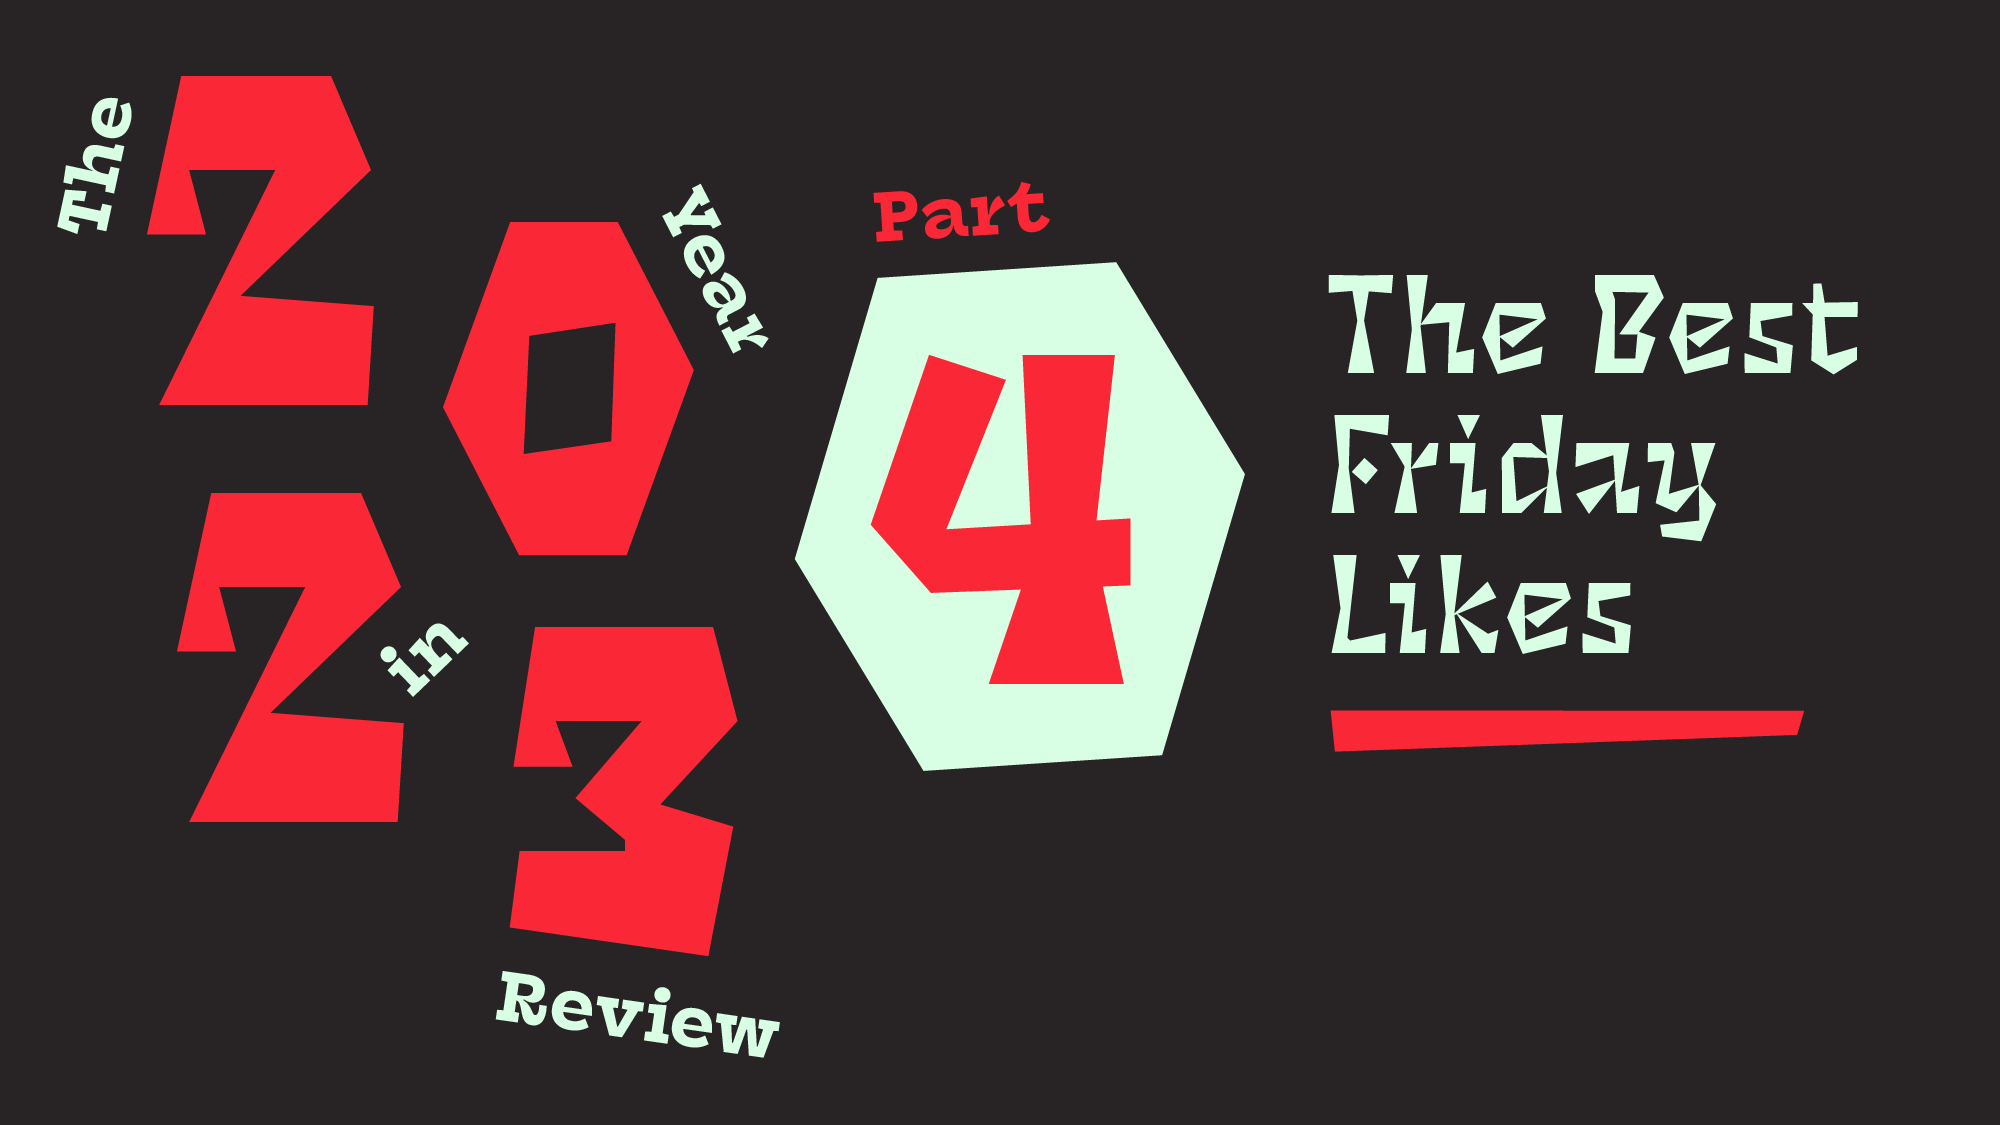 The Year in Review, Part 4: The Best Friday Likes